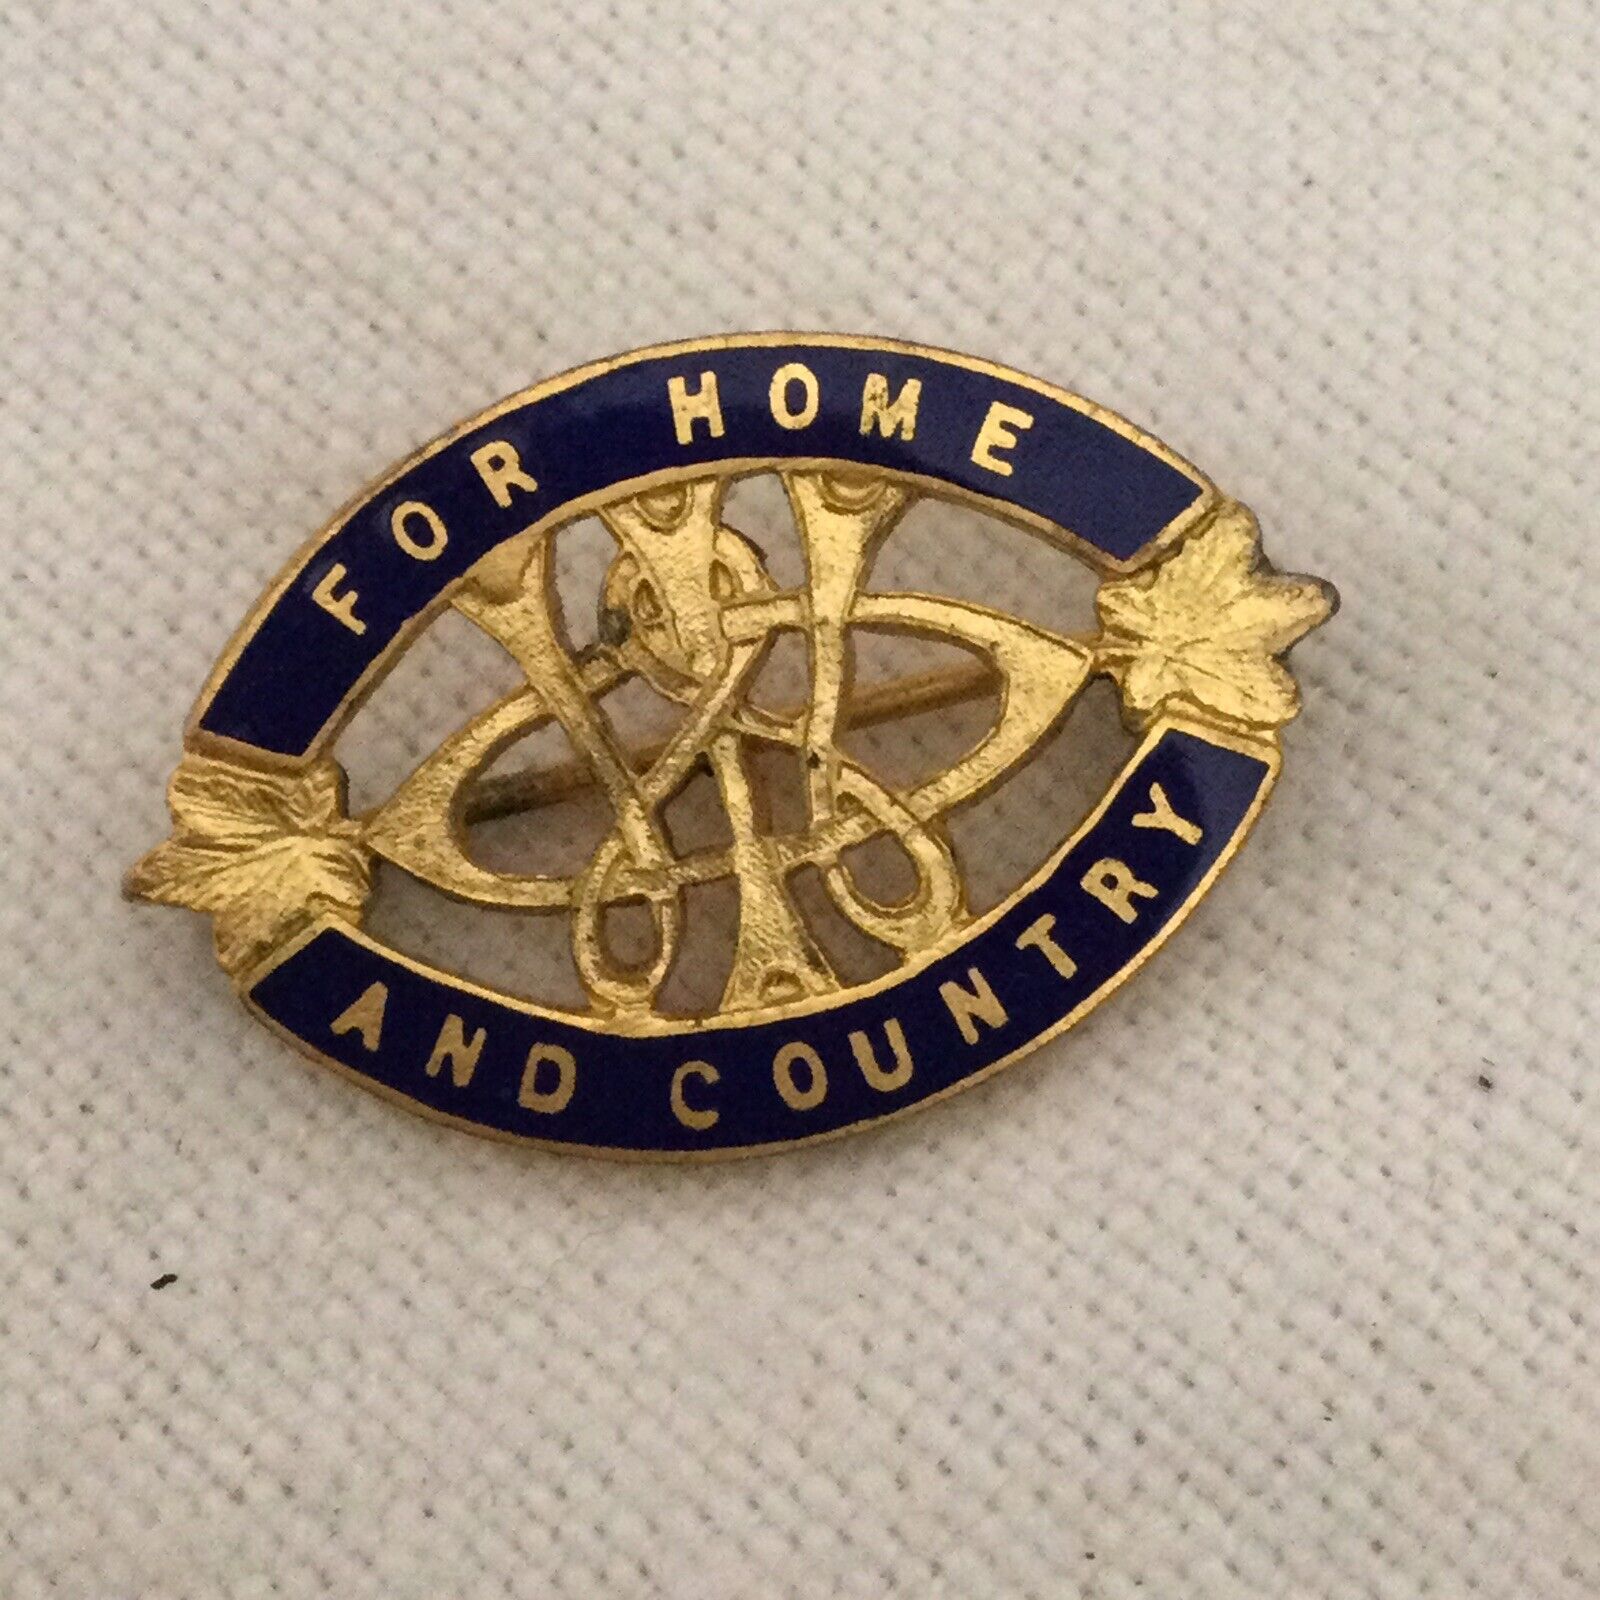 WW2 Era- For Home and Country, Birks, Oval Gilt & Navy Enamel pin